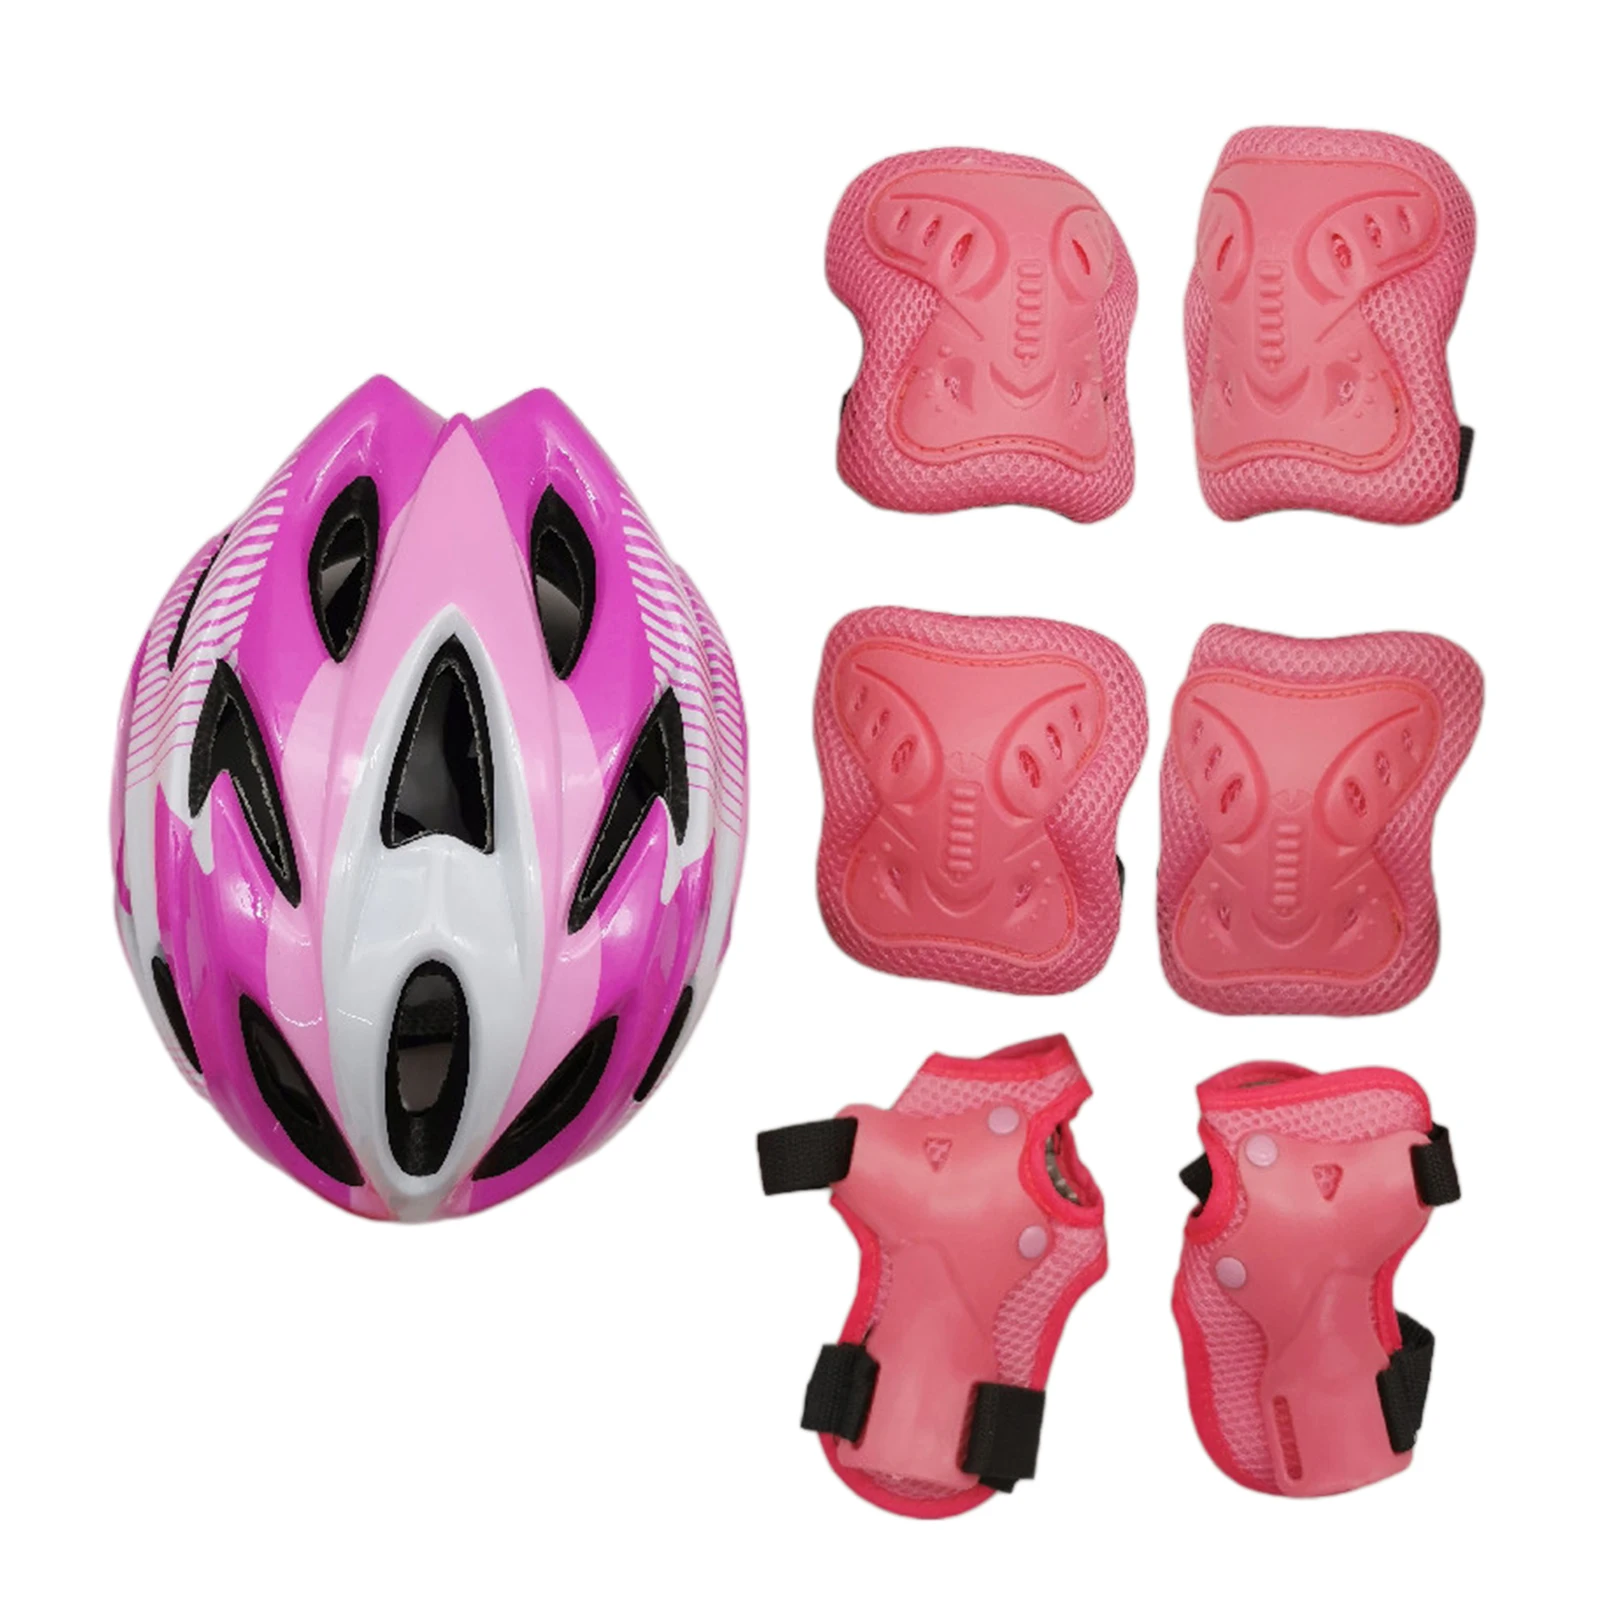 7pcs Kids Teenagers Knee Pads Elbow Pads Guards Protection Sports Safety Skating Skateboard Cycling Knee Protector